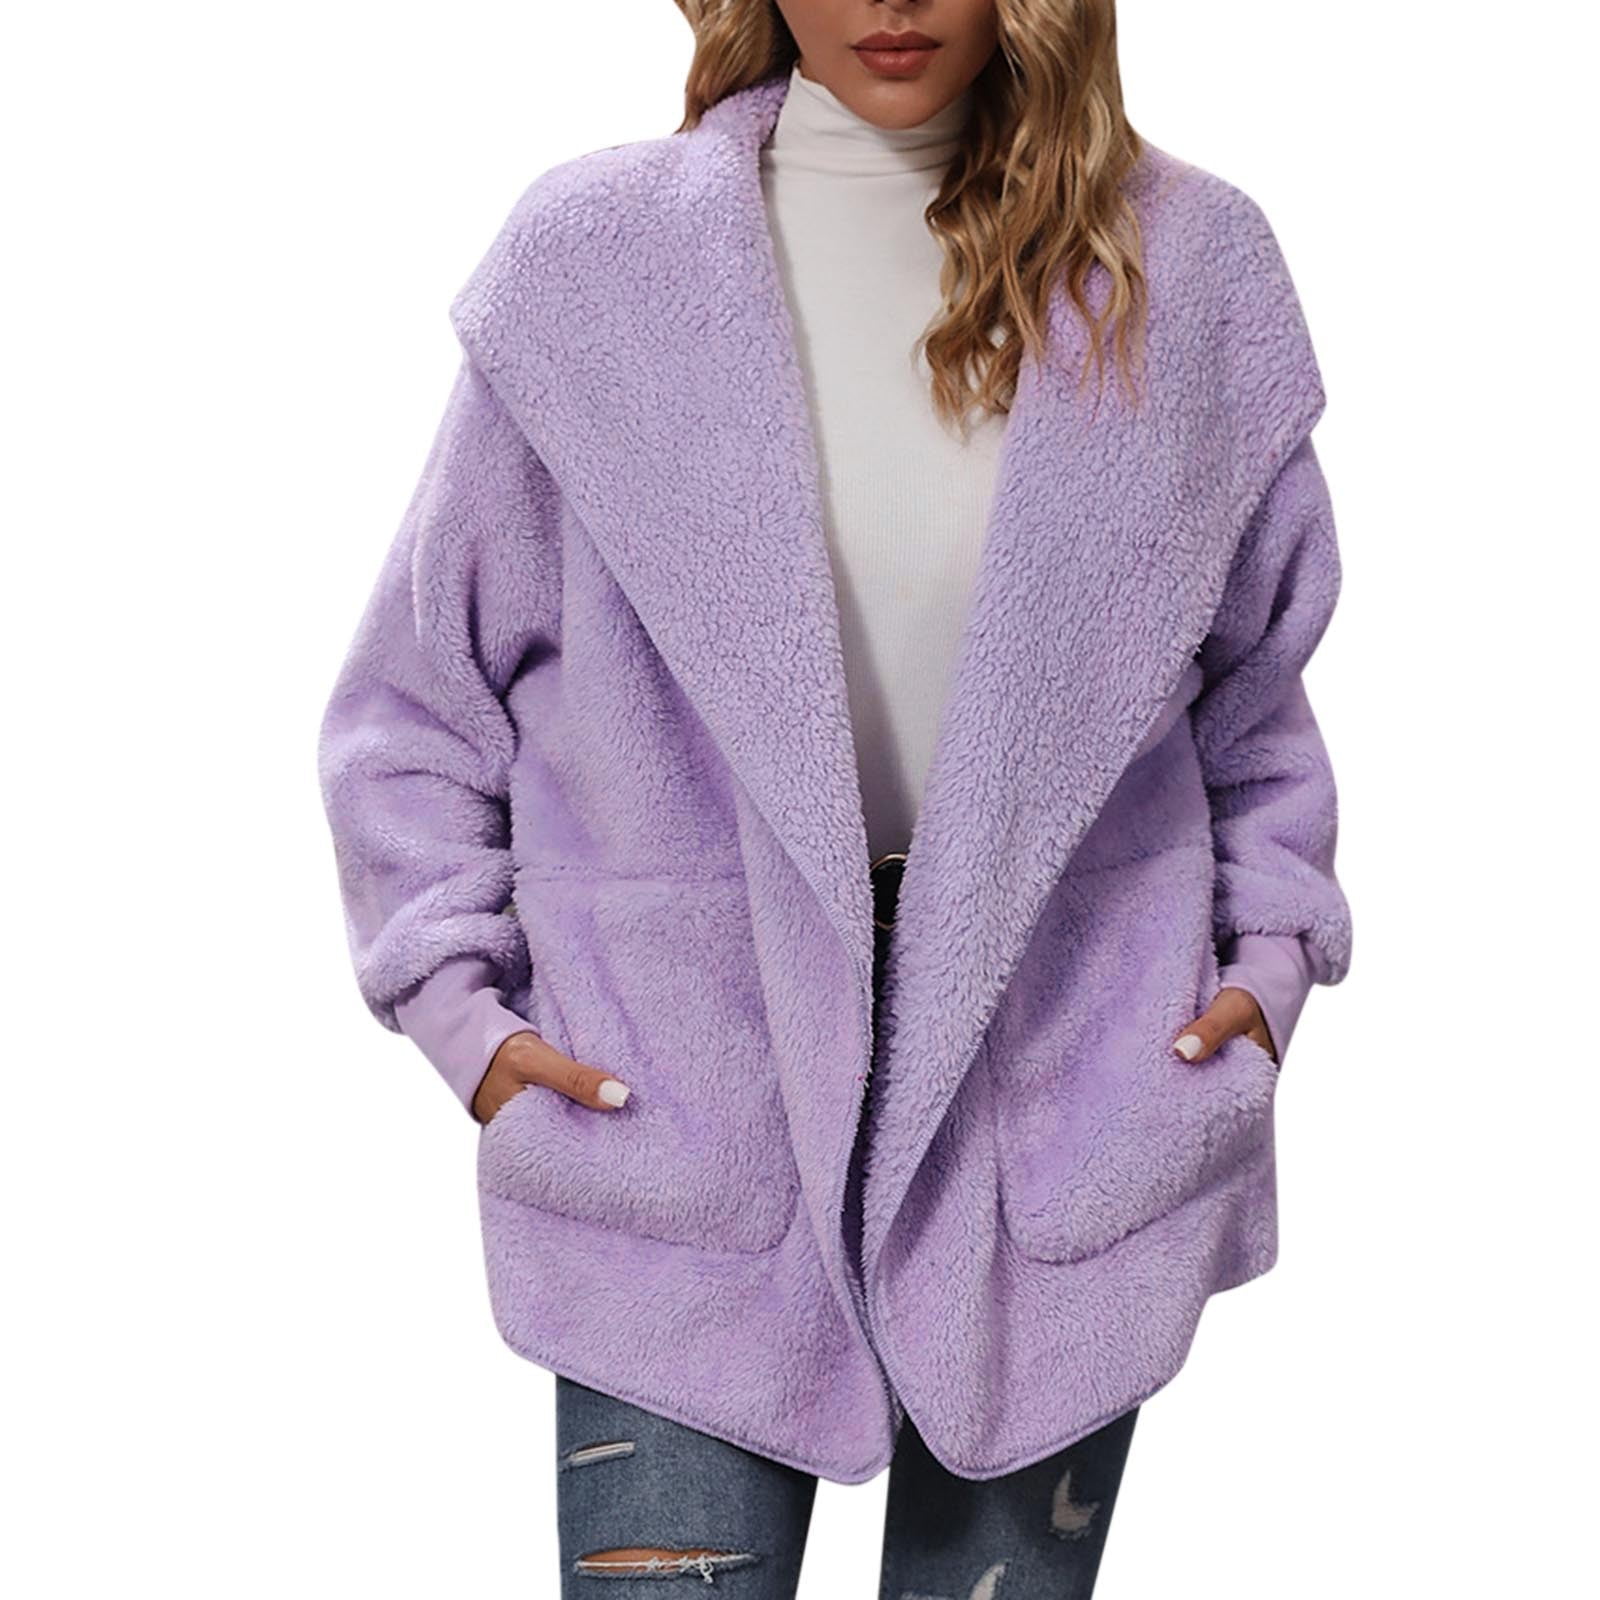 LBECLEY Bed Jacket Womens Jacket Fuzzy Hooded Casual Coats Cardigan ...